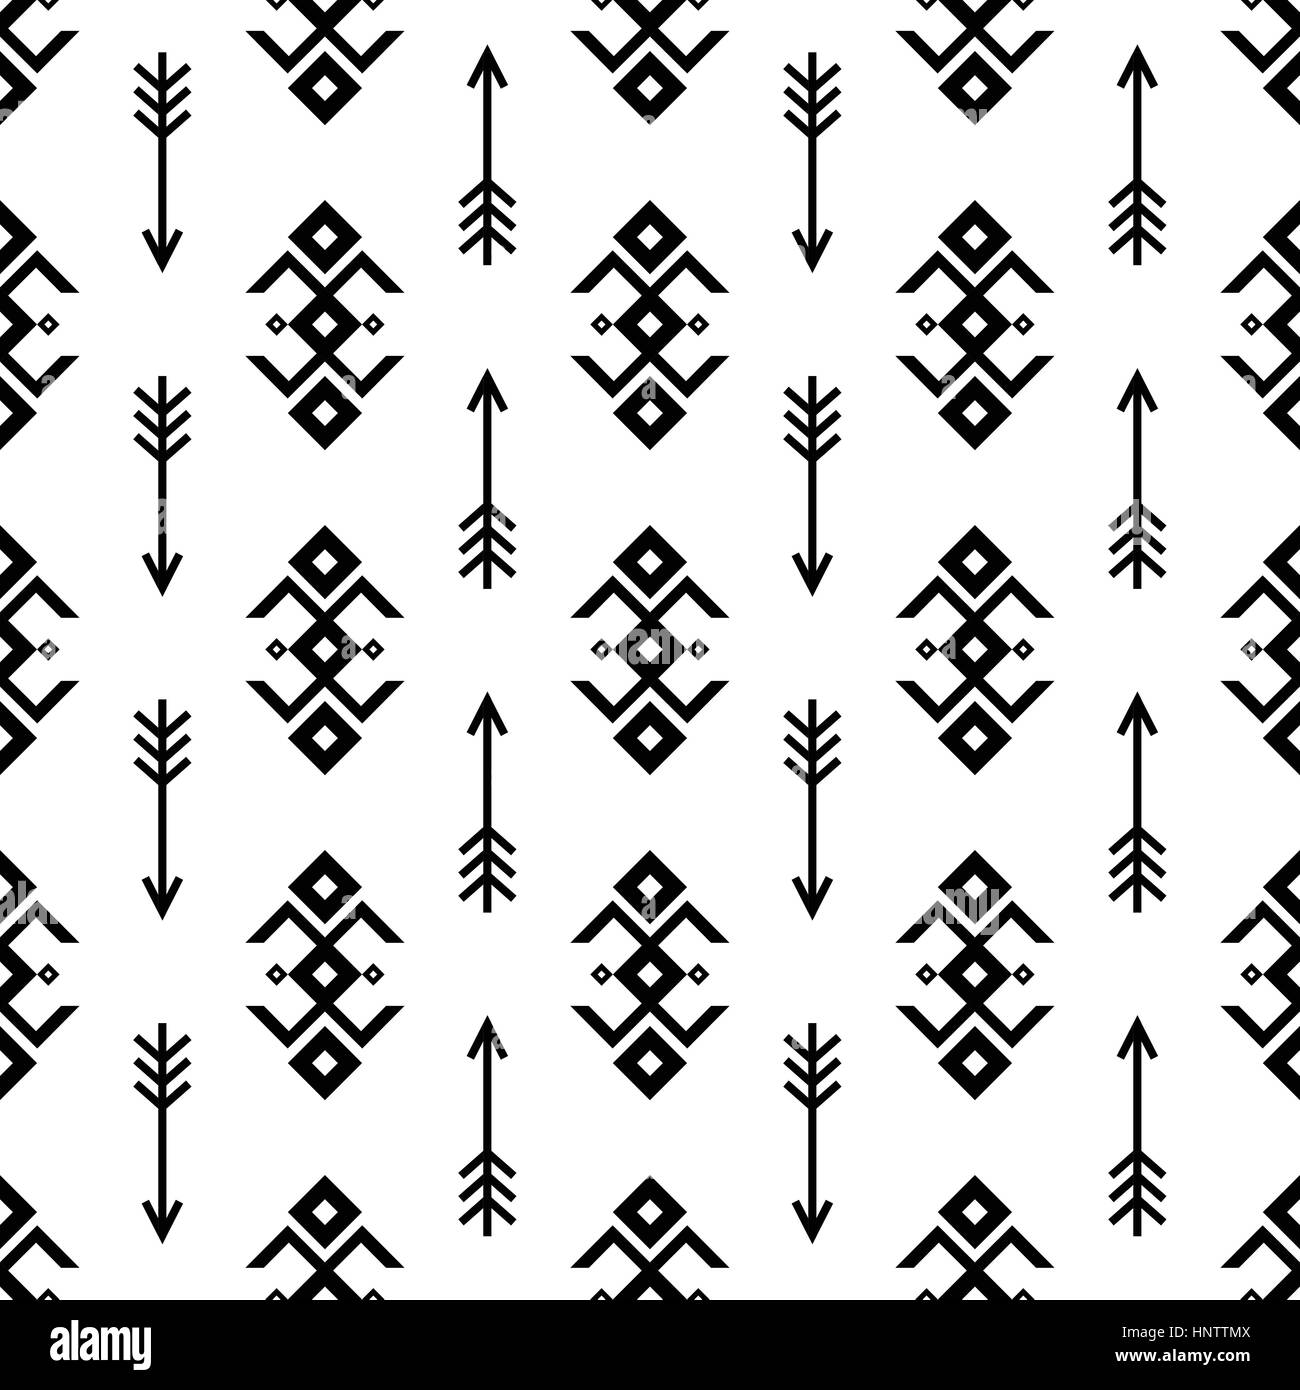 Seamless Indian pattern vector arrows and USA Native American type geometric ornaments black and white background design retro vintage bohemian boho s Stock Vector